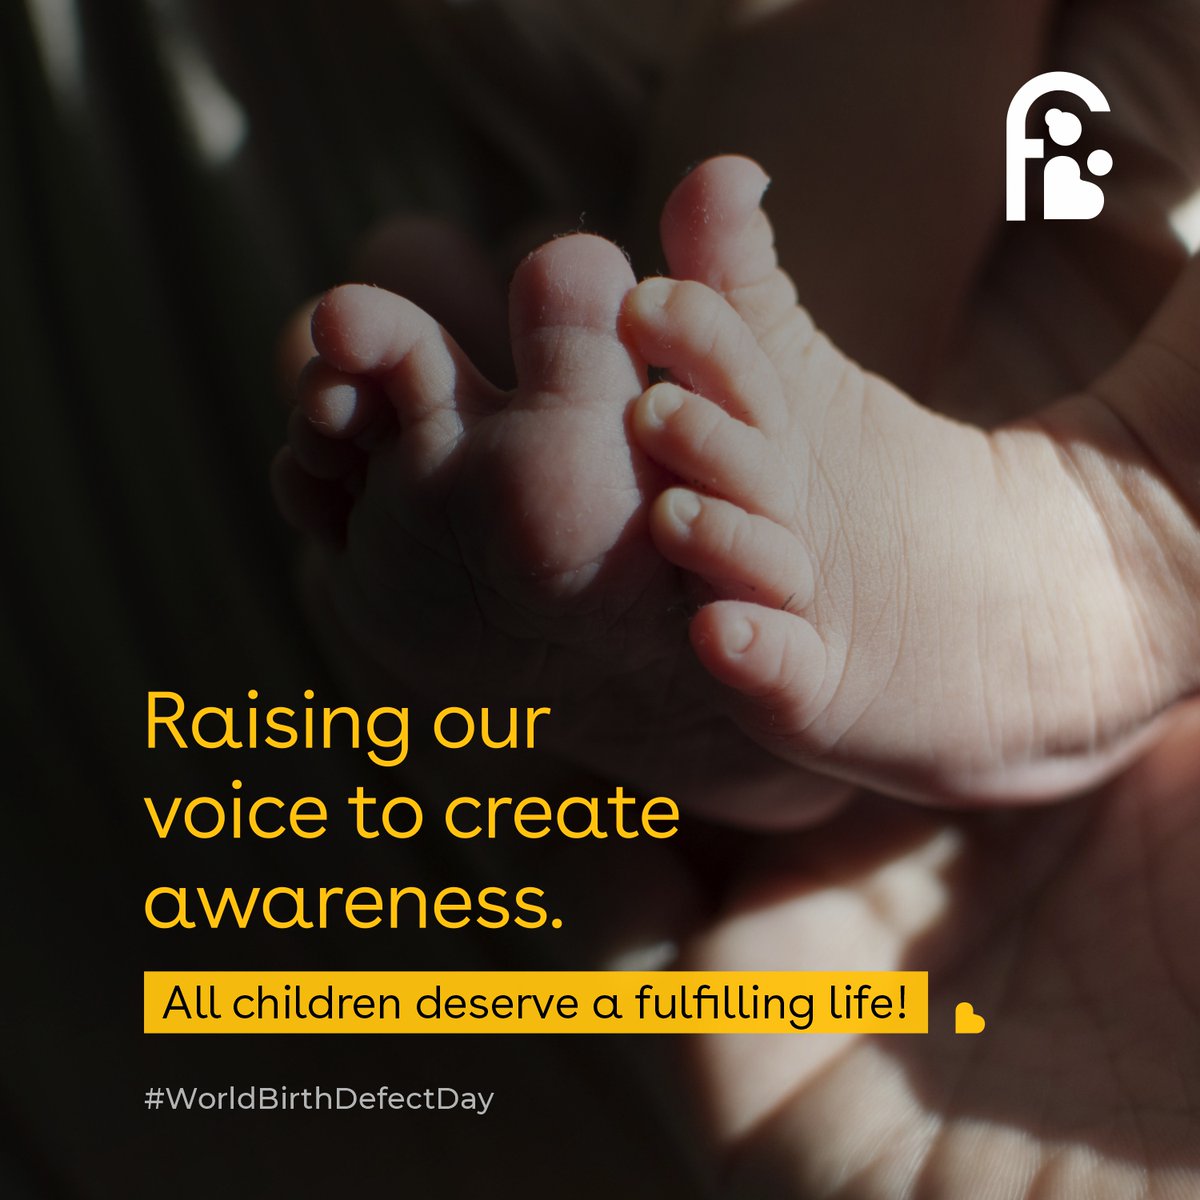 1 in every 33 babies born is affected by a birth defect. Improving research and quality newborn care gives every child a chance to thrive. #WorldBirthDefectDay #WorldBDDay